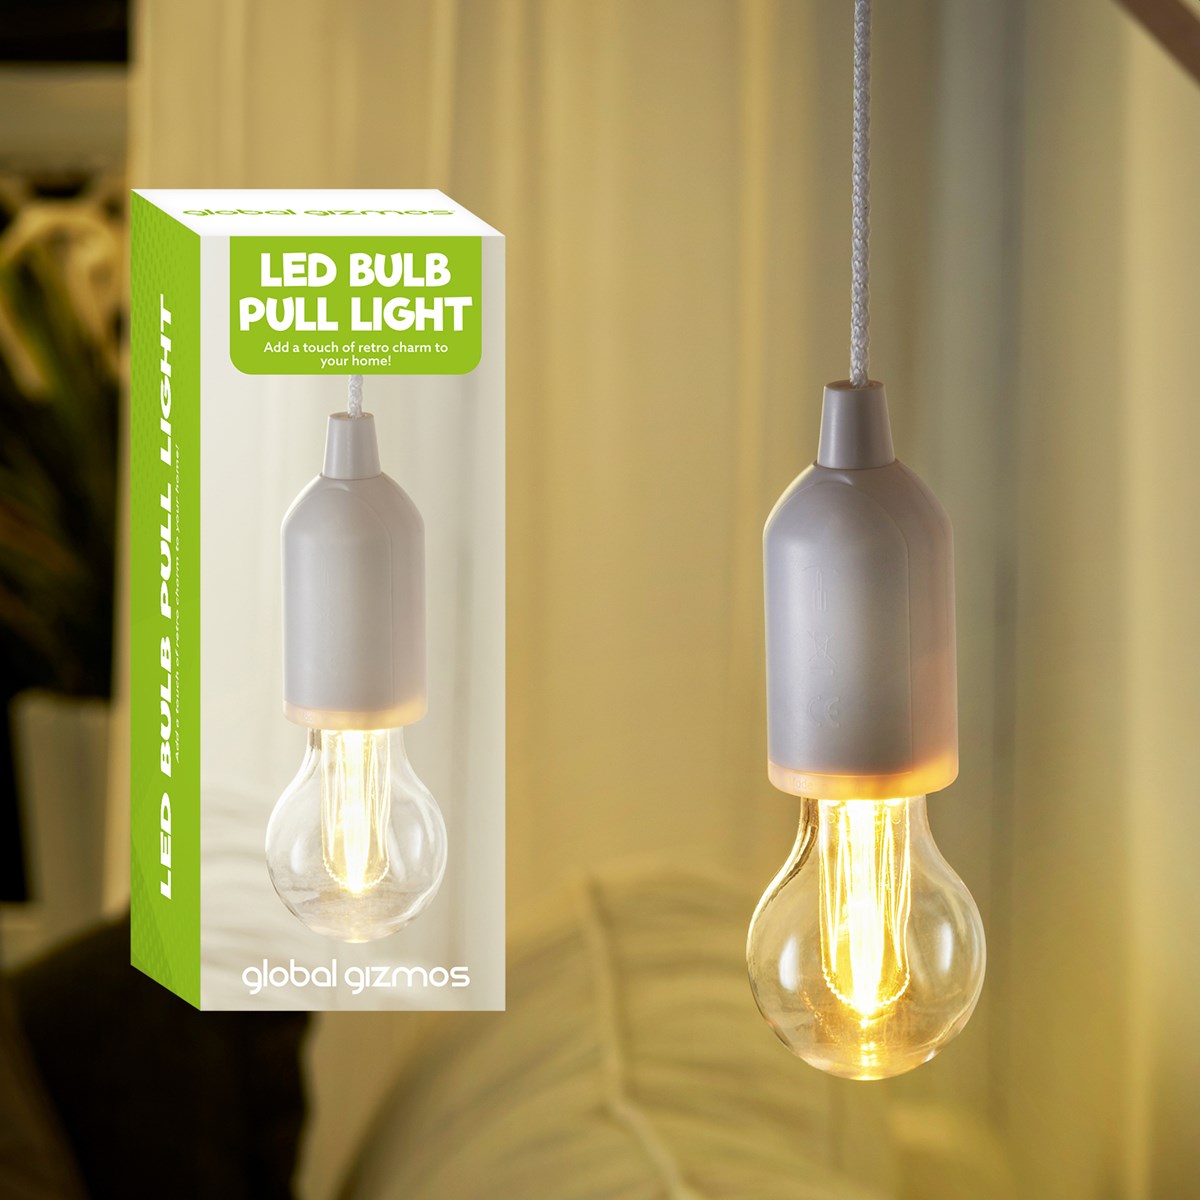 Portable LED Bulb Light On Rope Reading Lamp White Battery Operated Pull Cord 